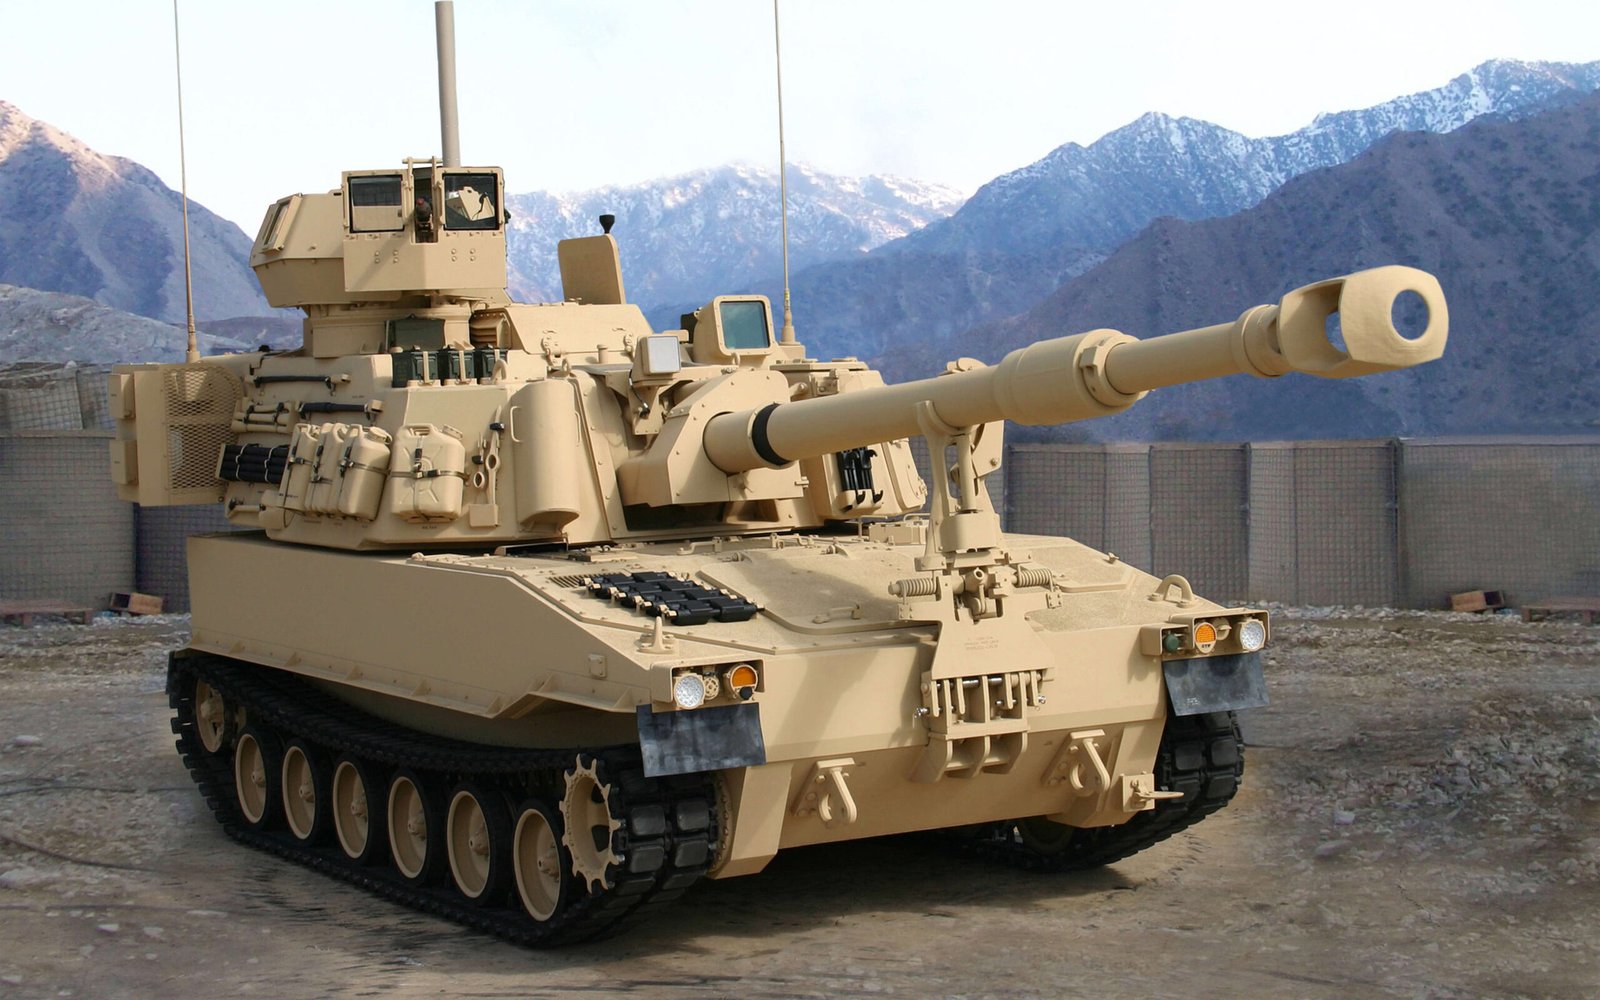 m109 howitzer self propelled howitzer m109a6 paladin american modern weapons armored vehicles scaled